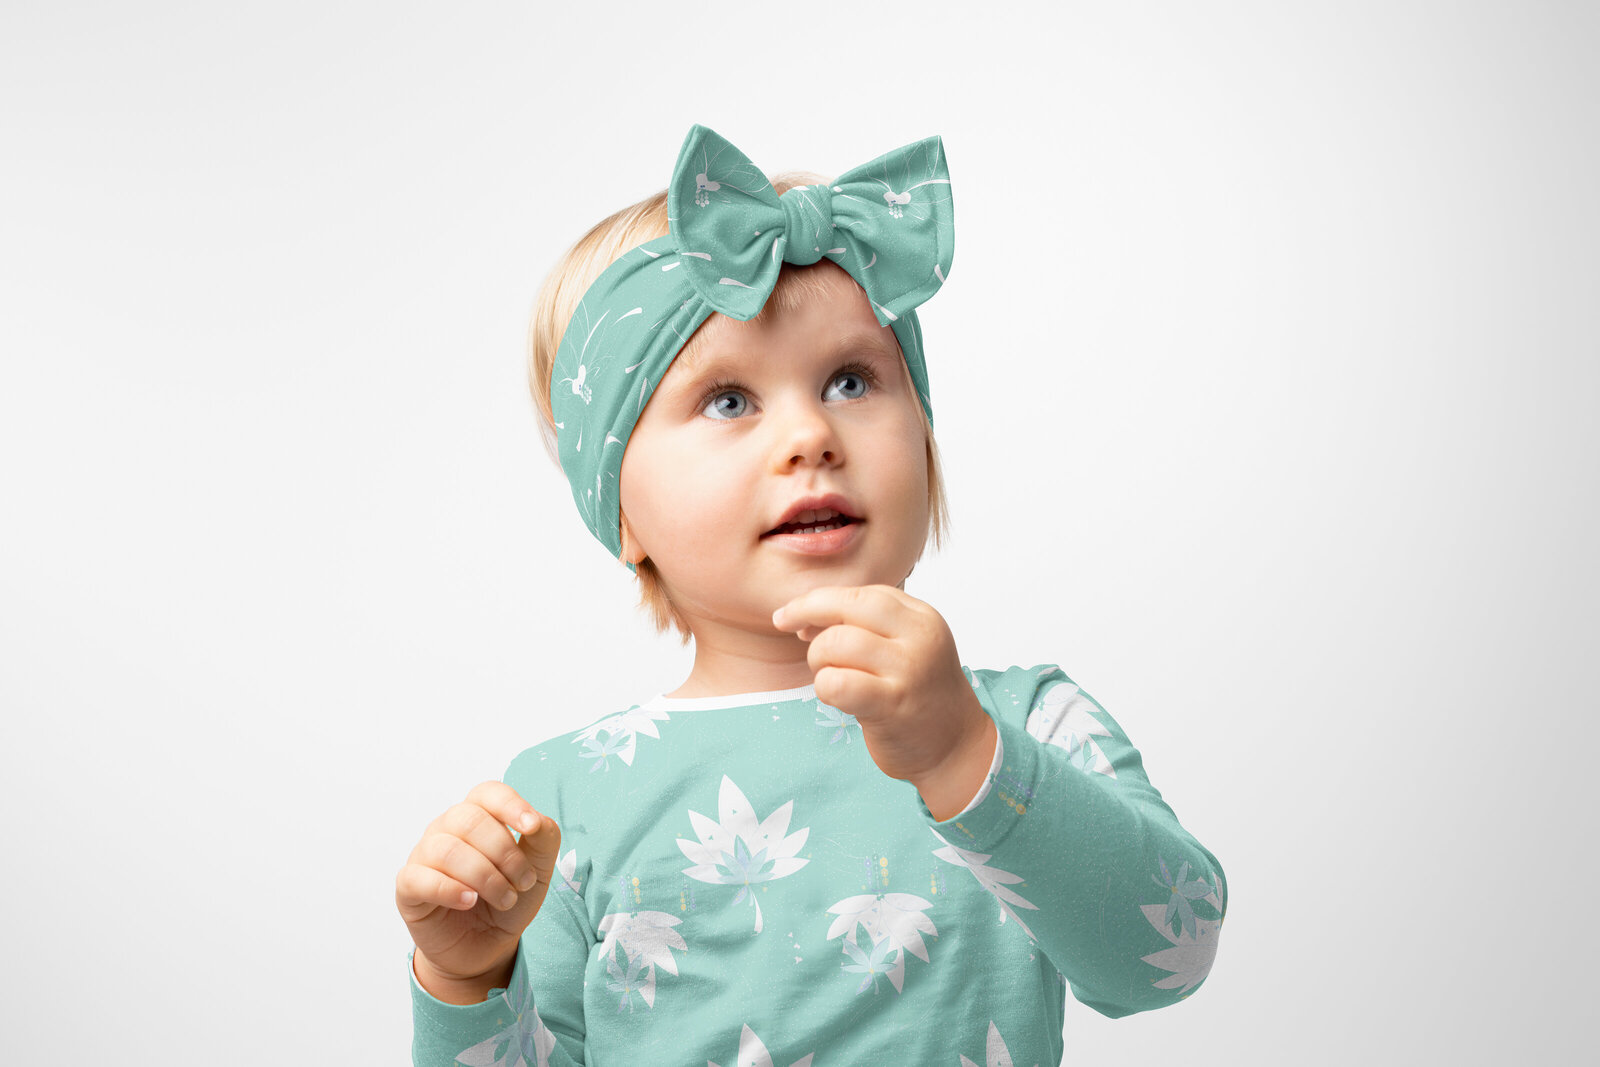 green and white patterned fabric headband and children's shirt